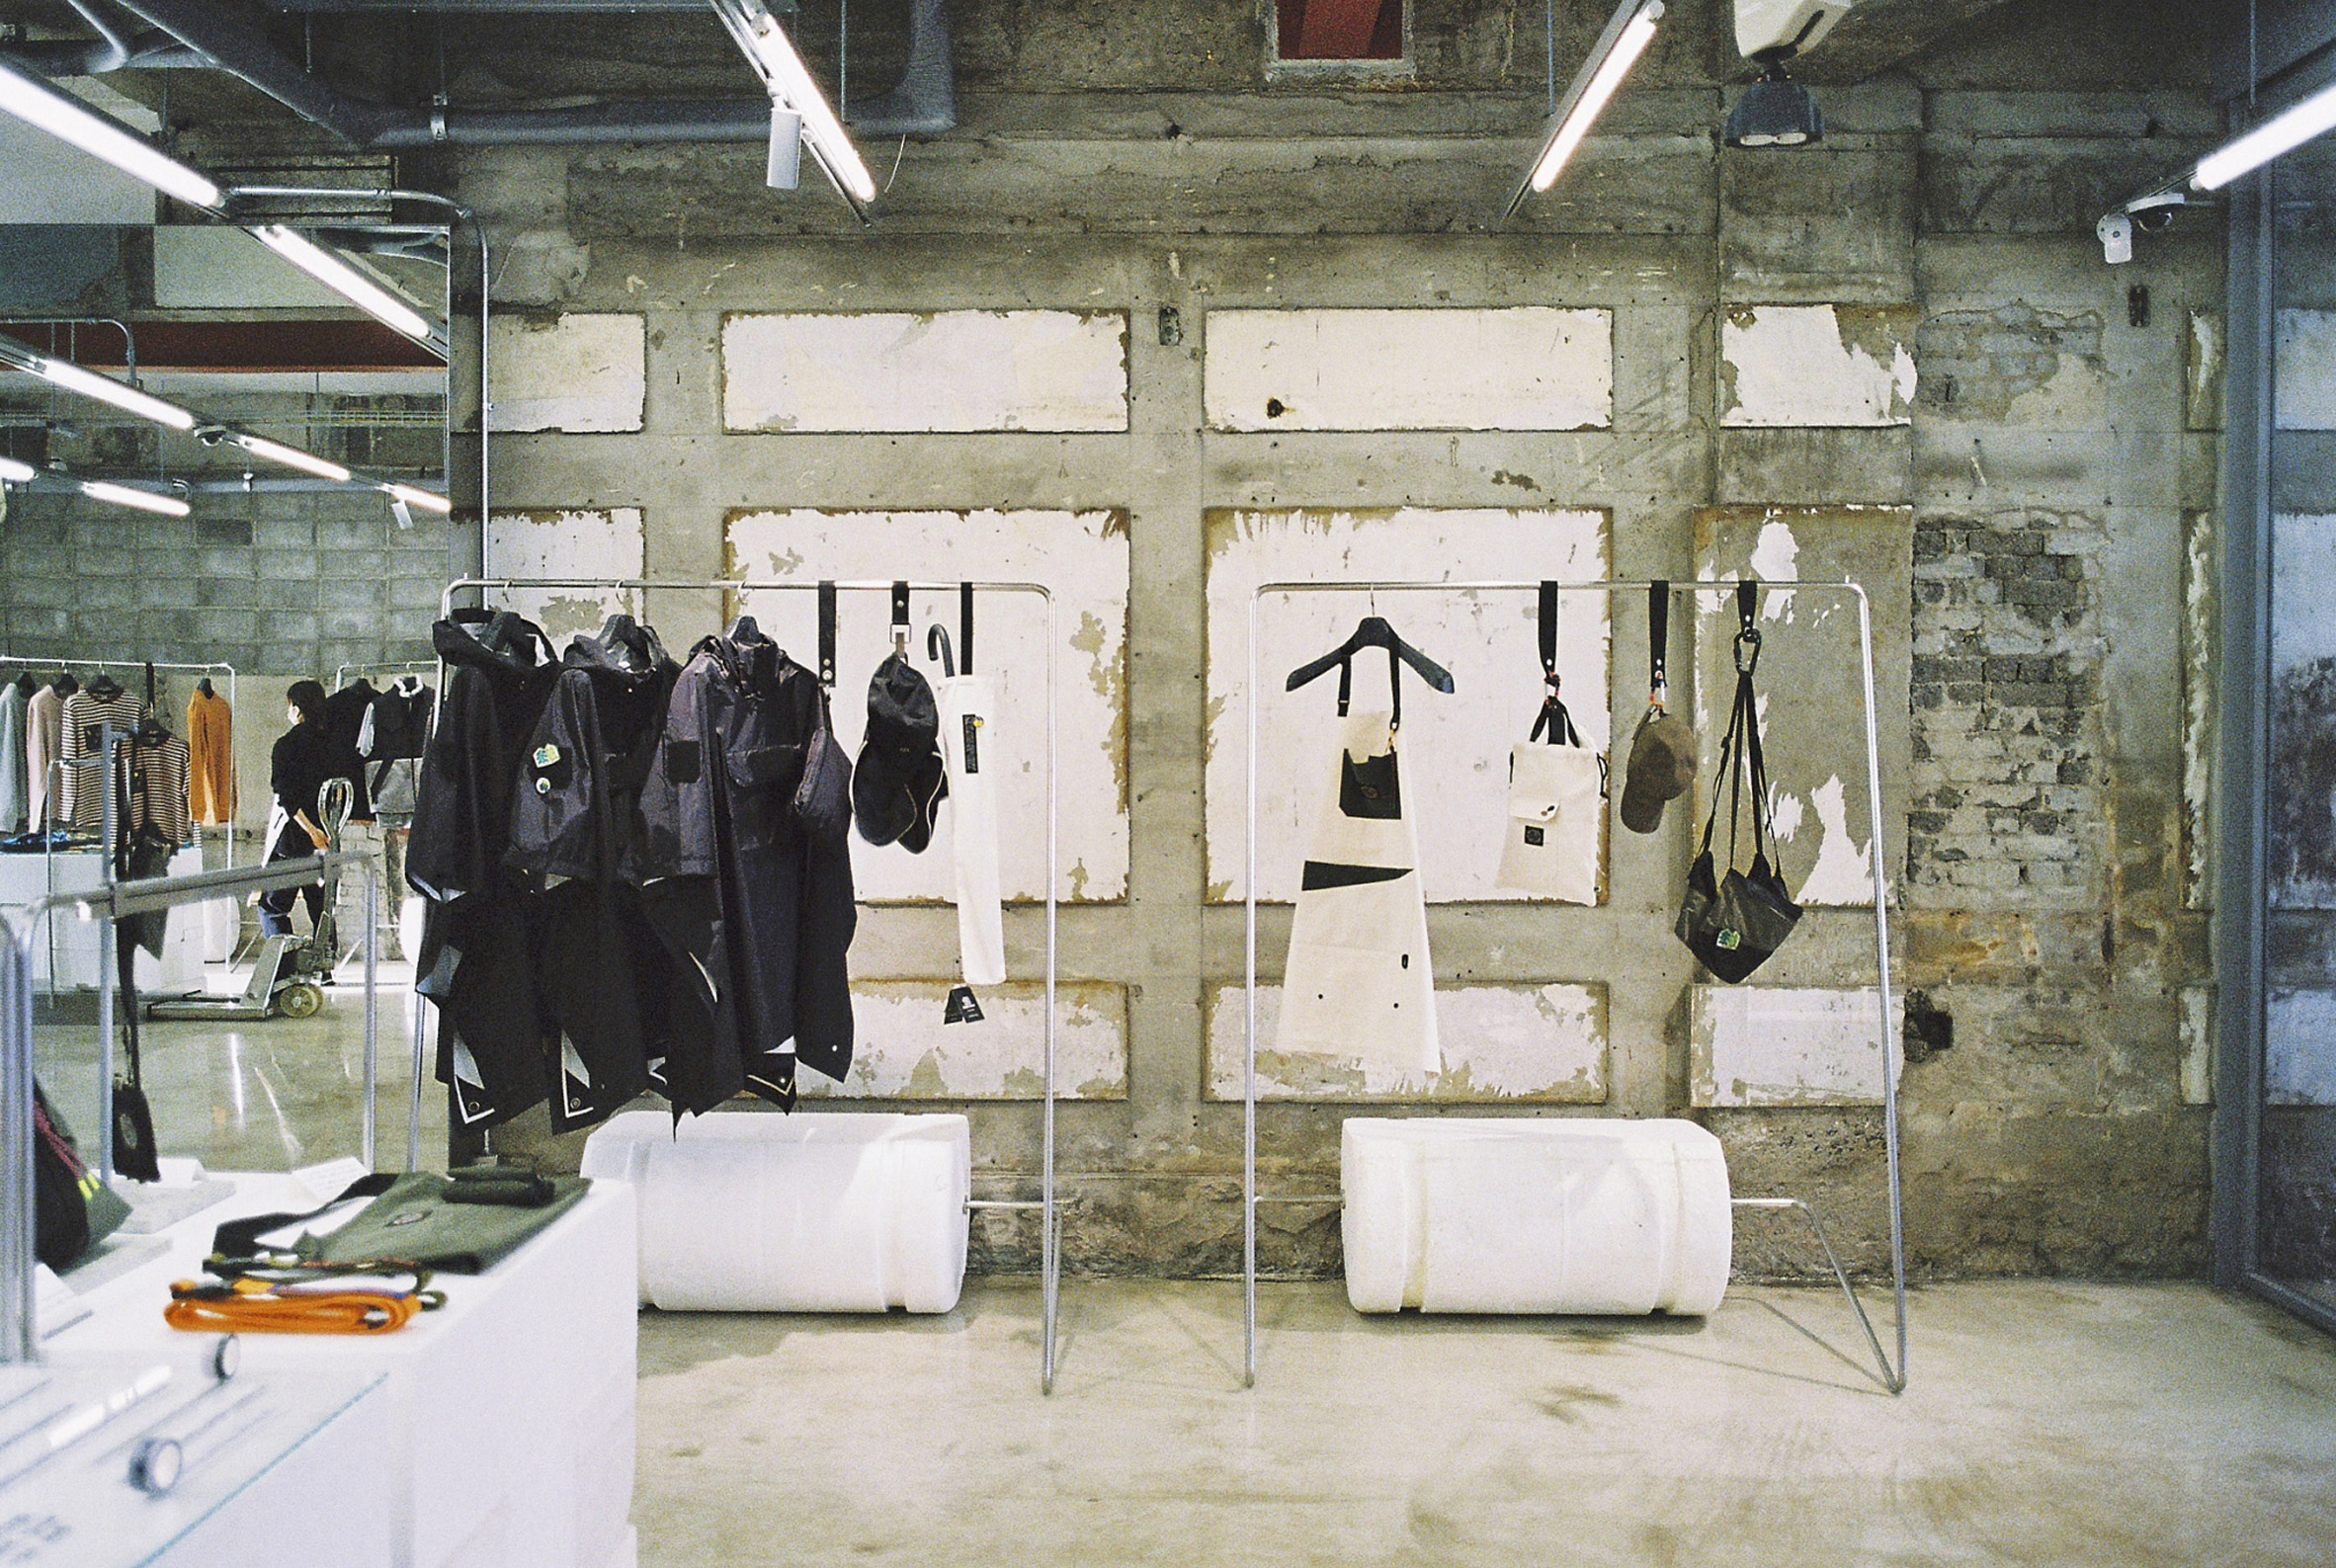 Interior image of the Kolon Sport store with clothing displayed beside concrete walls